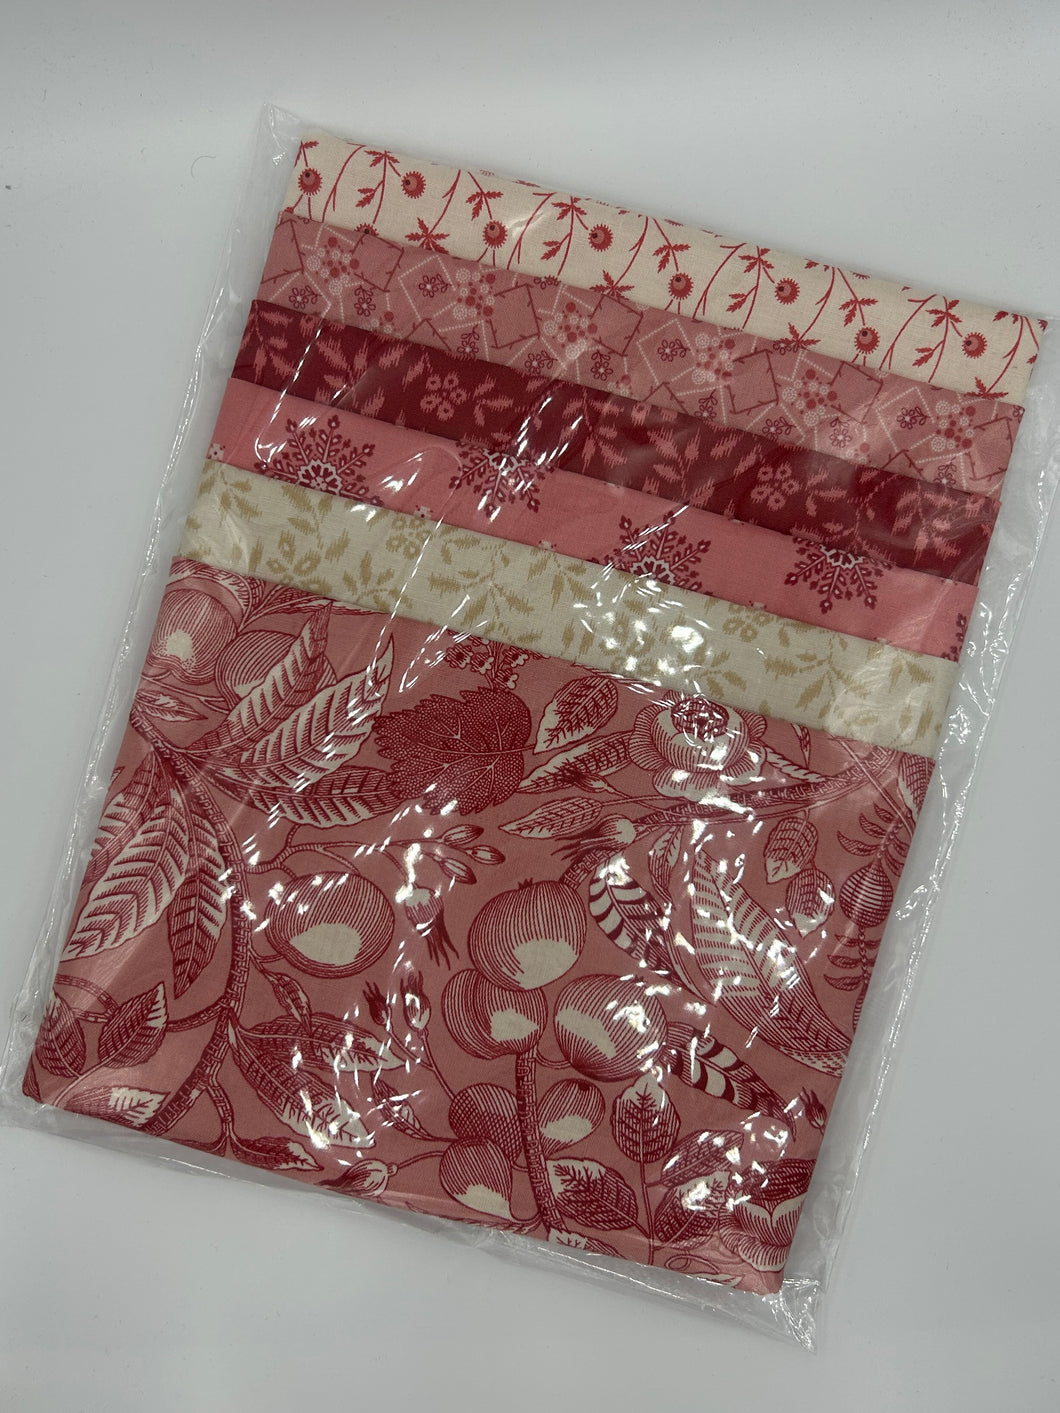 Fat Quarter Medley of Strawberries and Cream by Andover Fabrics